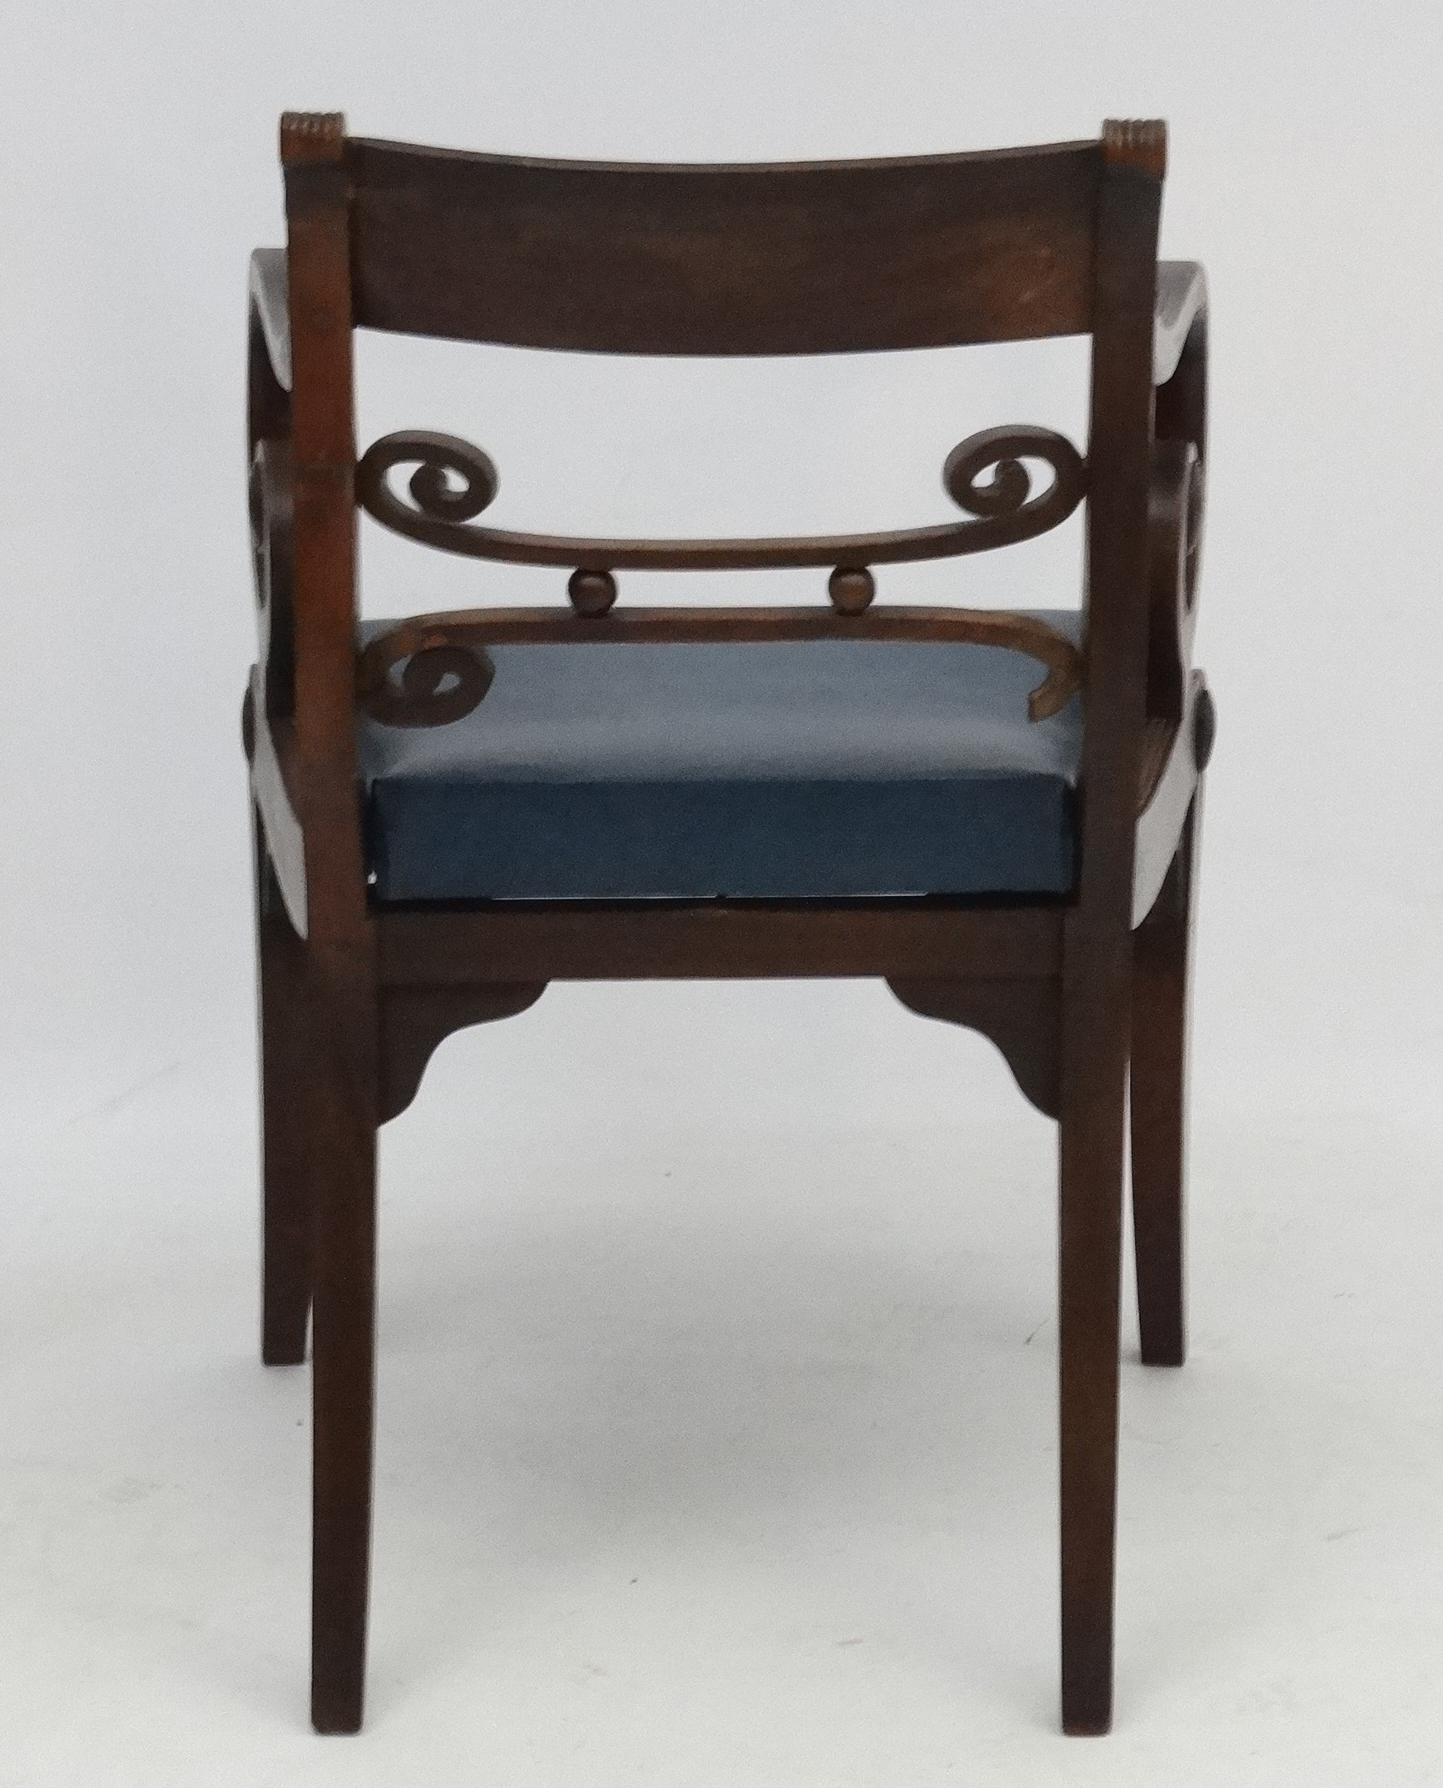 A Regency mahogany open arm / carver chair with sabre legs and drop in seats 32 1/2" high - Image 5 of 5